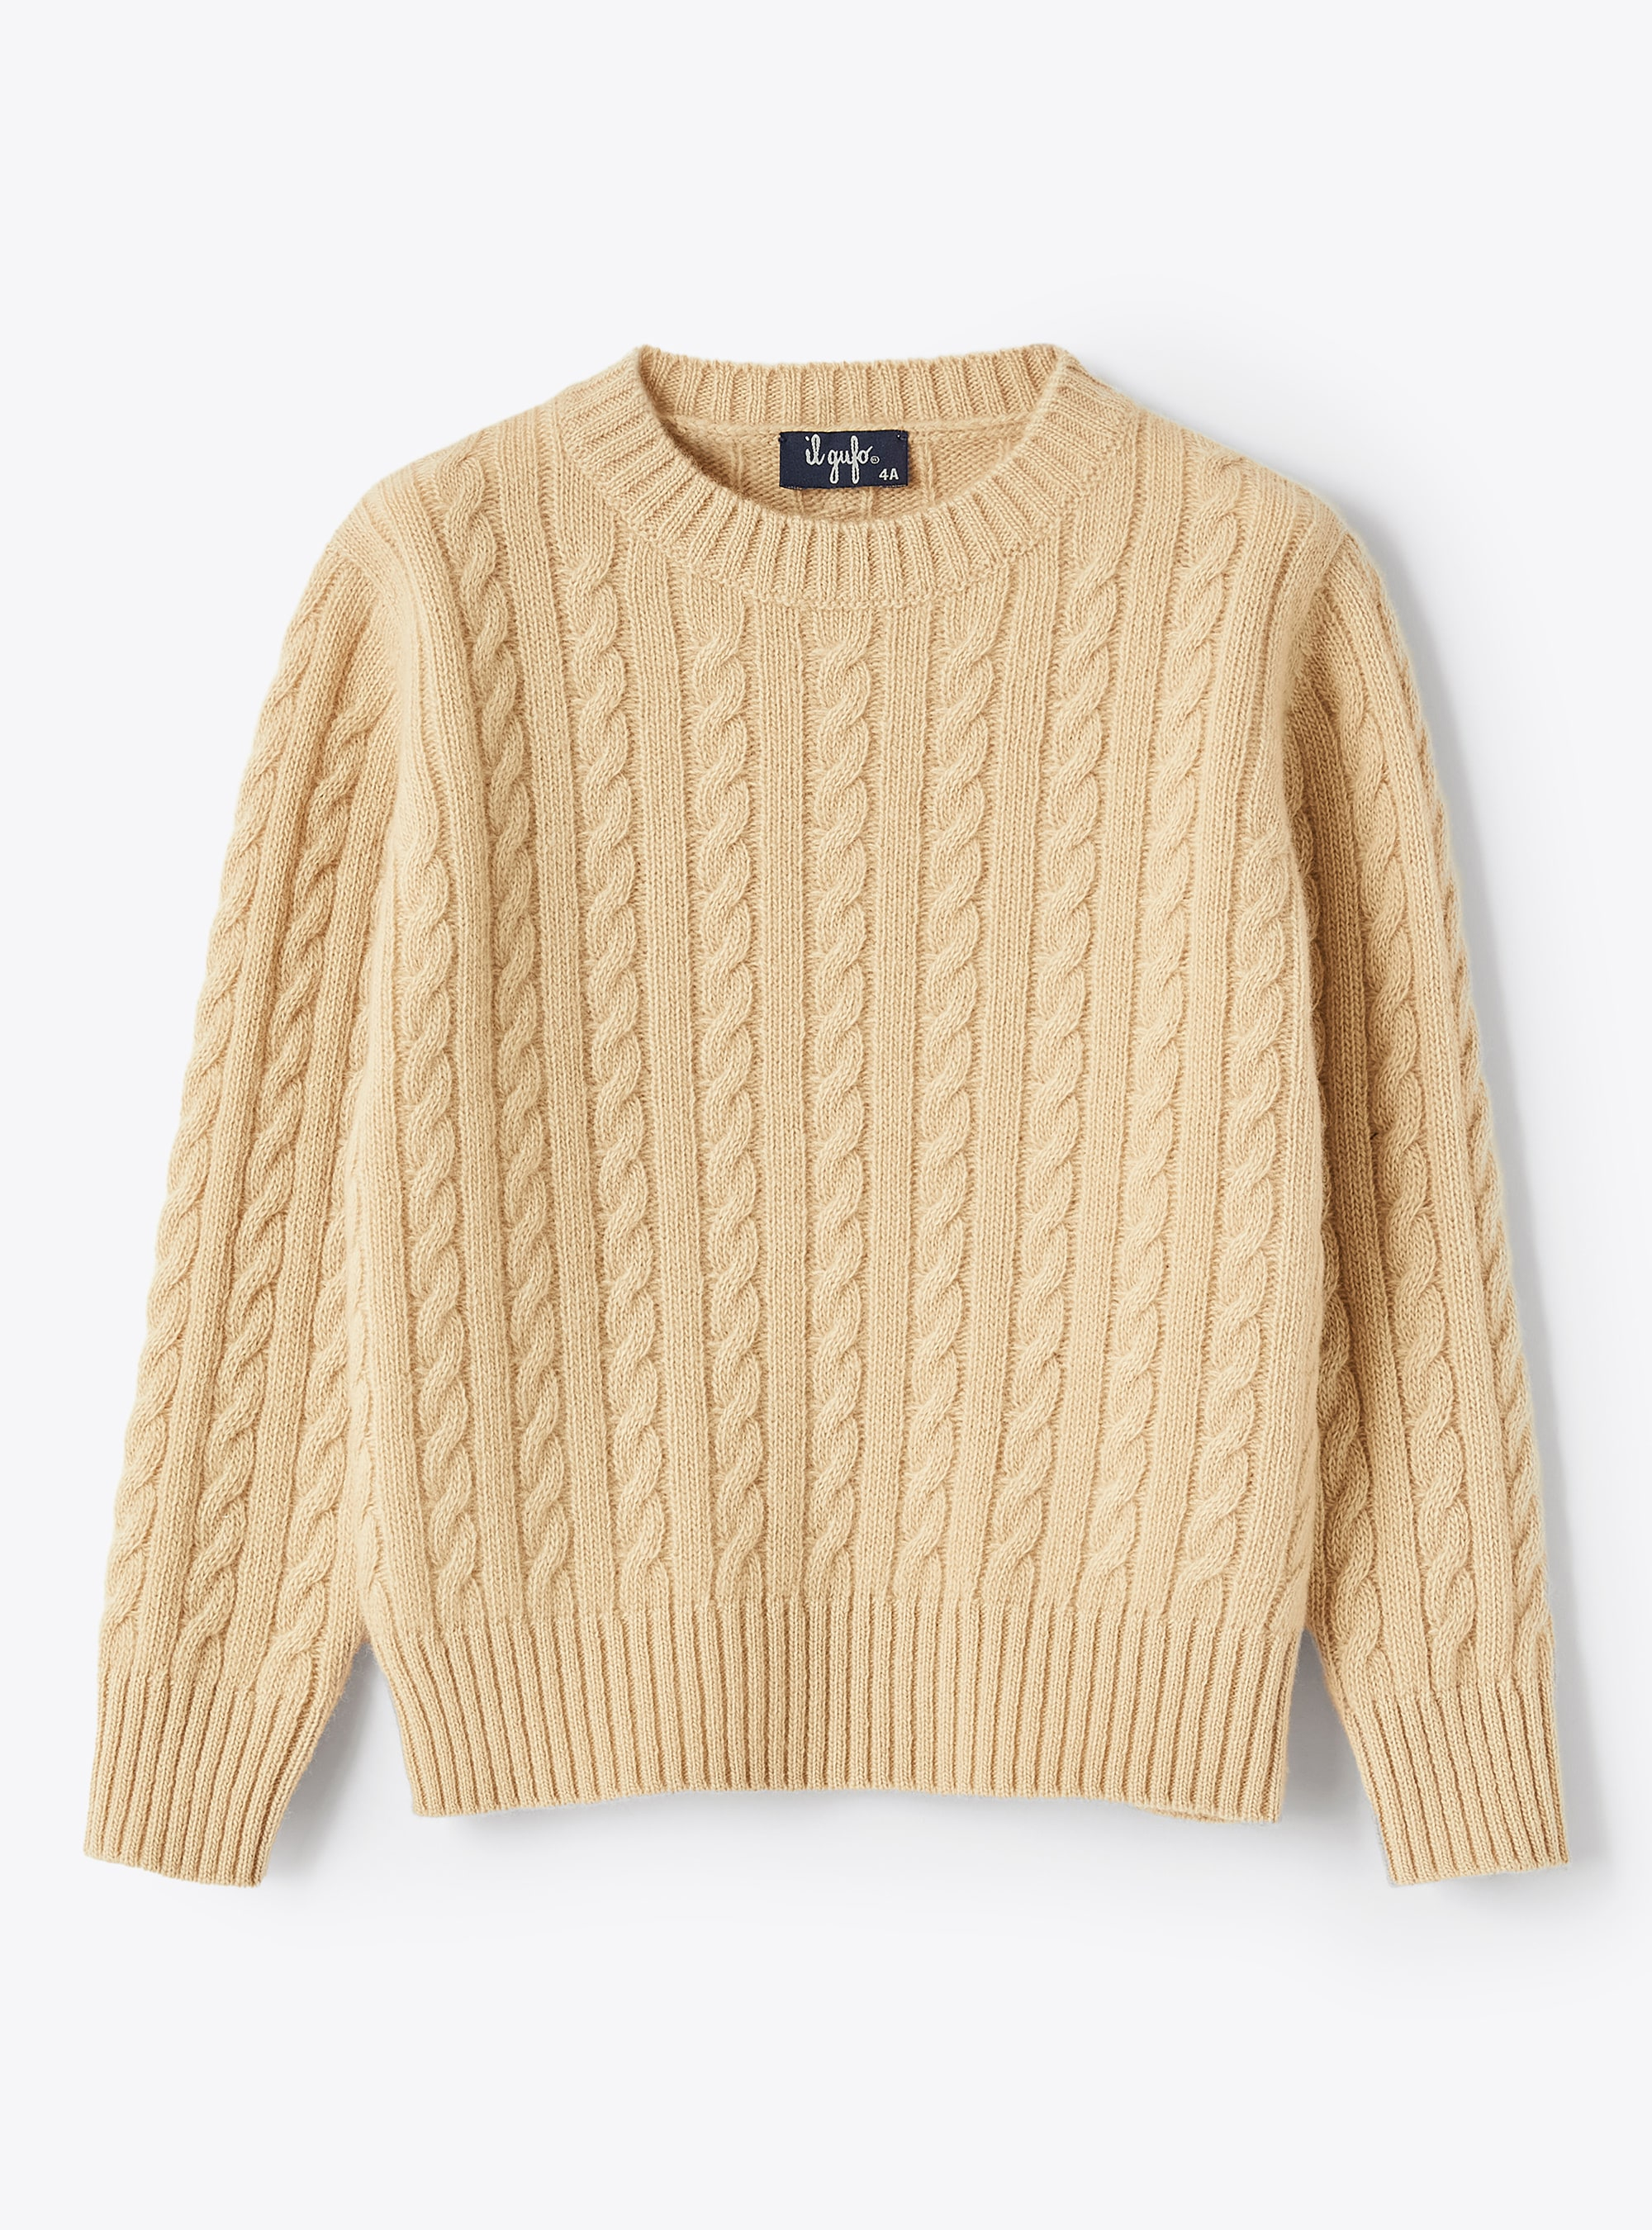 Beige cable knit wool sweater - Sweaters - Il Gufo